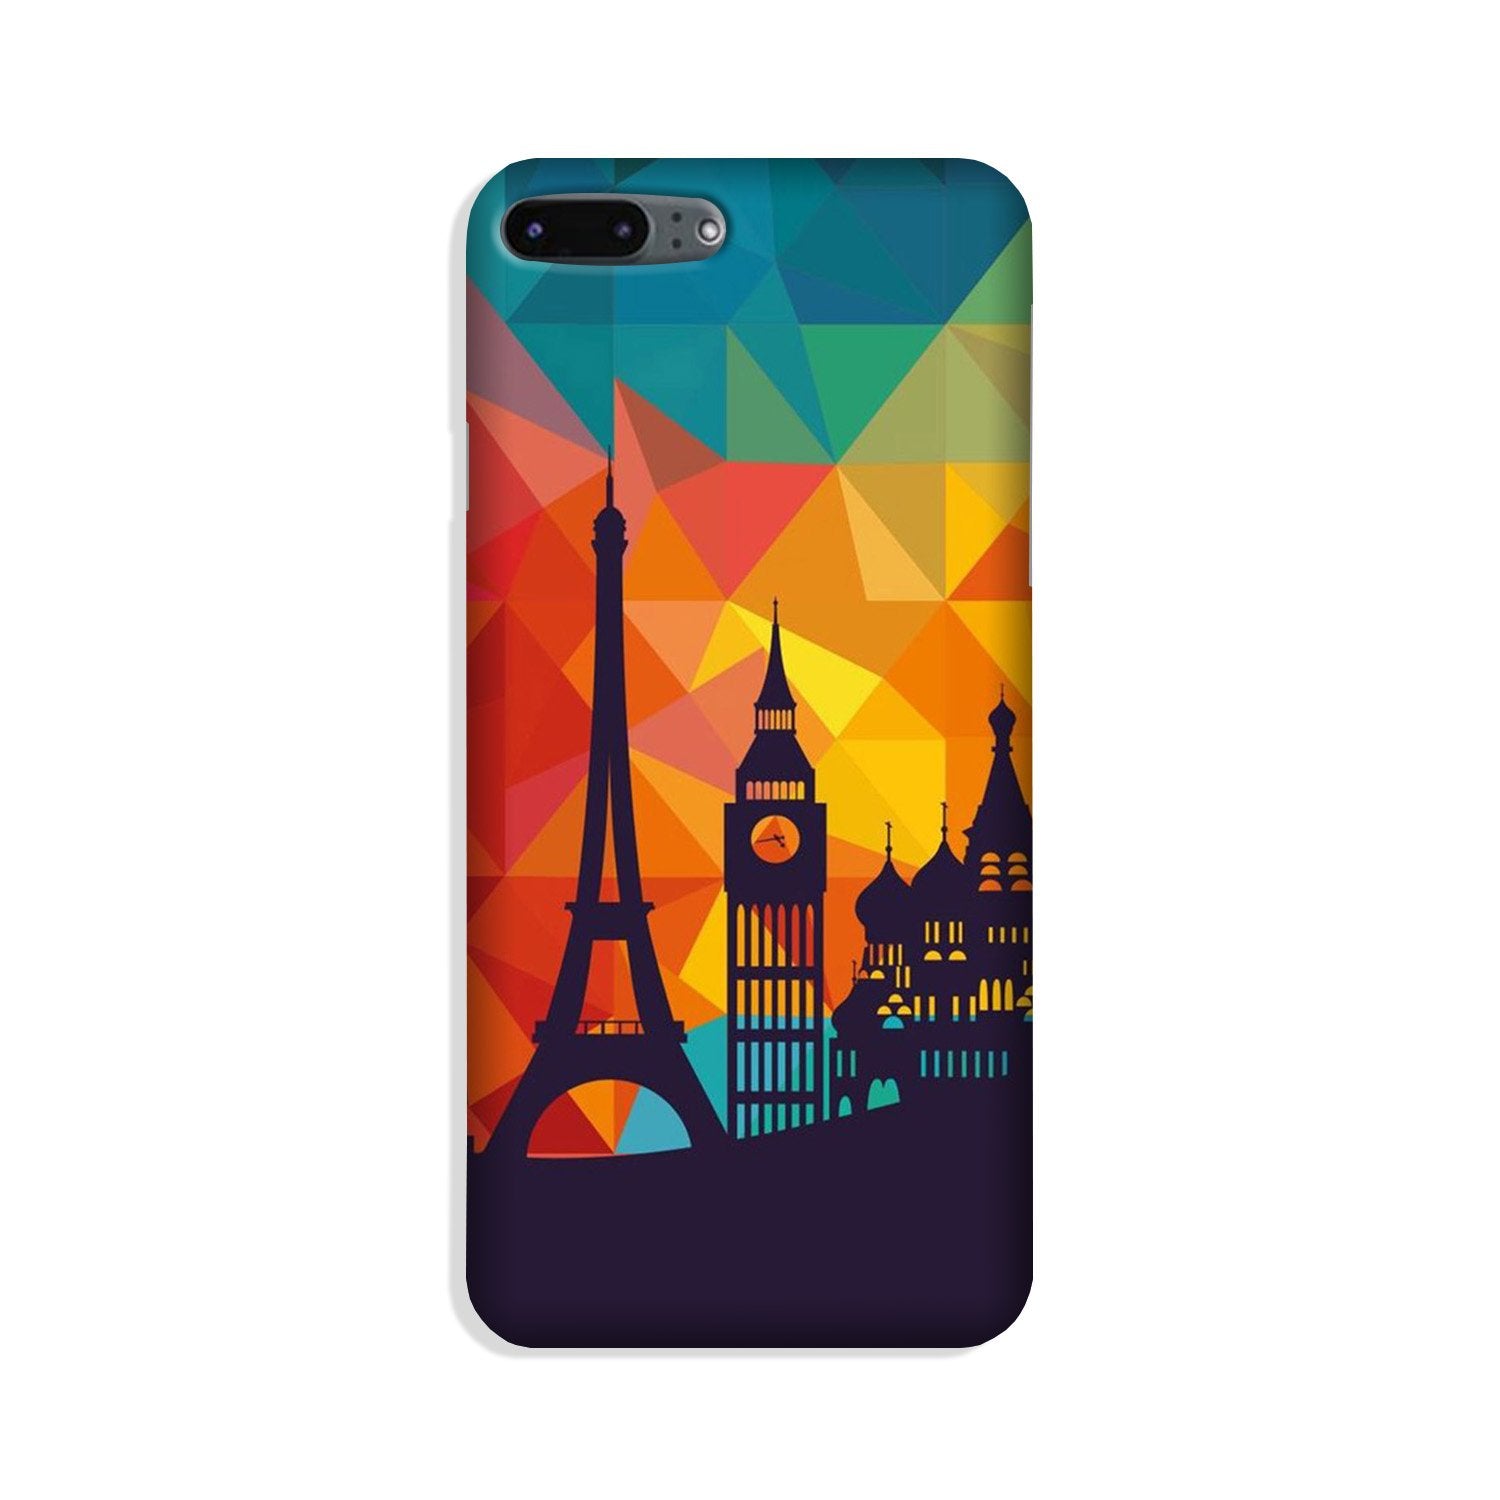 Eiffel Tower2 Case for iPhone 8 Plus